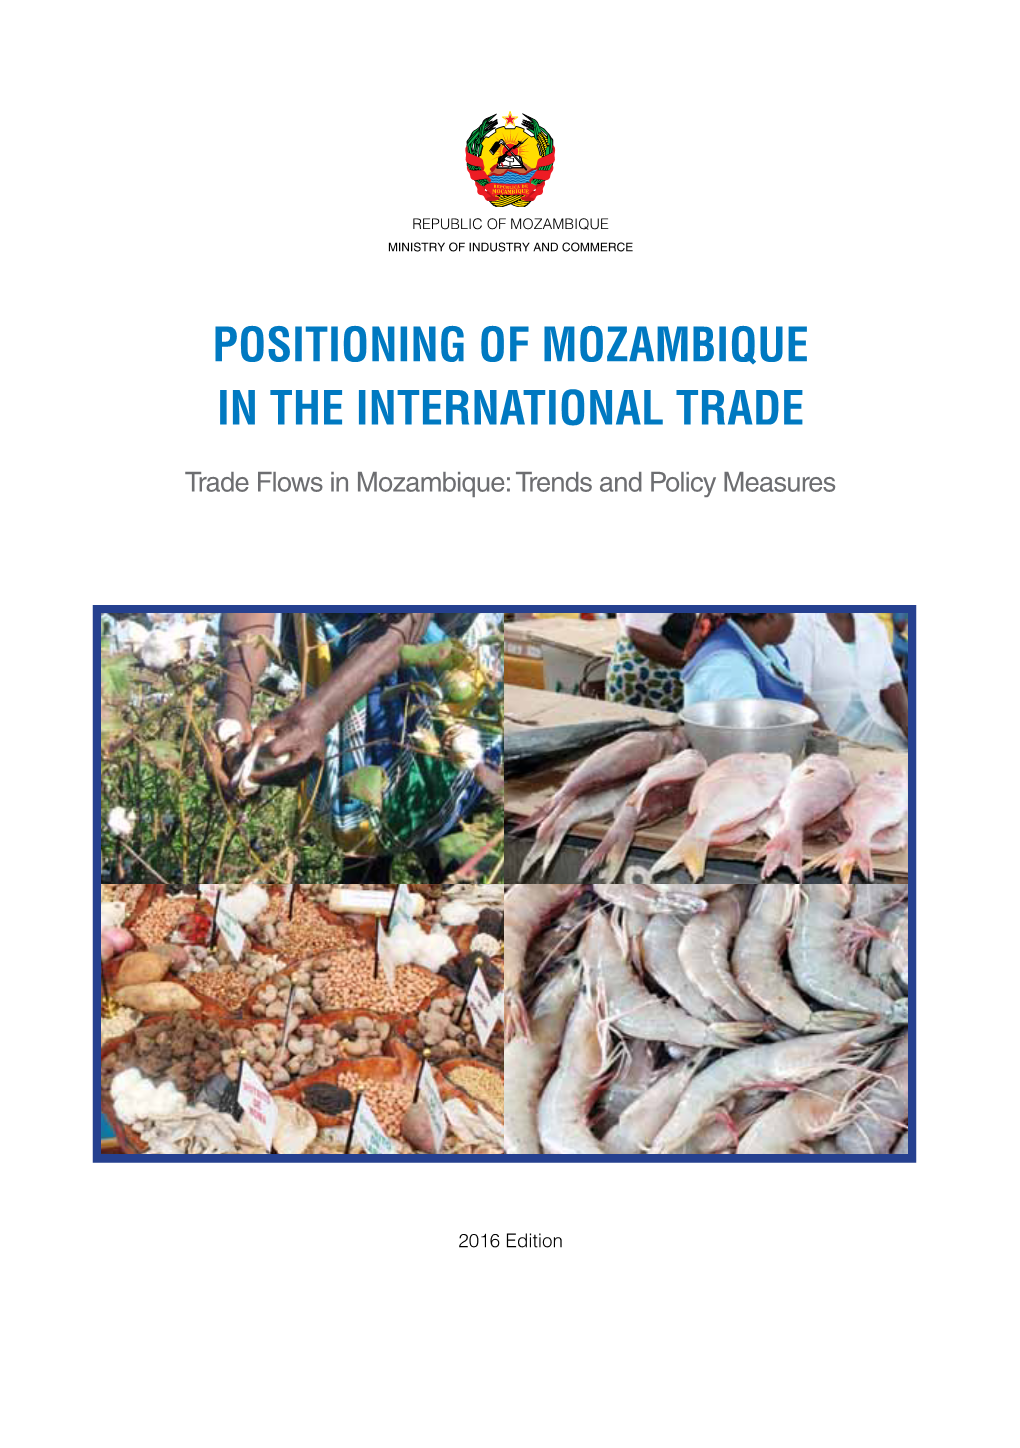 Positioning of Mozambique in the International Trade